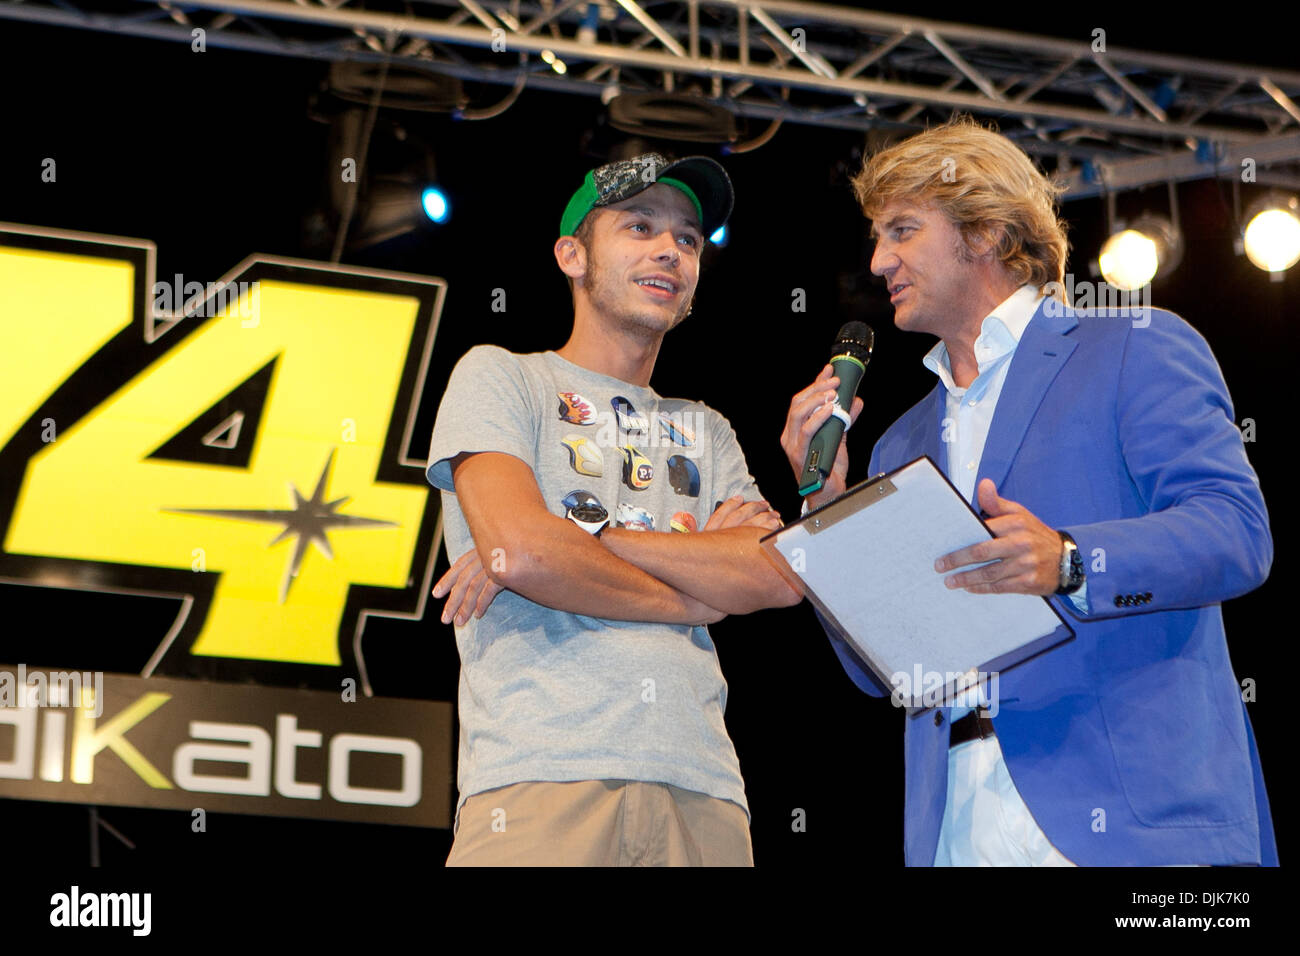 Sep. 02, 2010 - Misano Adriatico, Italy - Yamaha rider Valentino Rossi (left) interviewed by Franco Bobbiese (rigth) of the Italian television Mediaset at an event in memory of the Japanese rider Dajiro Kato died in an incident in April 2003 (Credit Image: © Andrea Ranalli/Southcreek Global/ZUMApress.com) Stock Photo